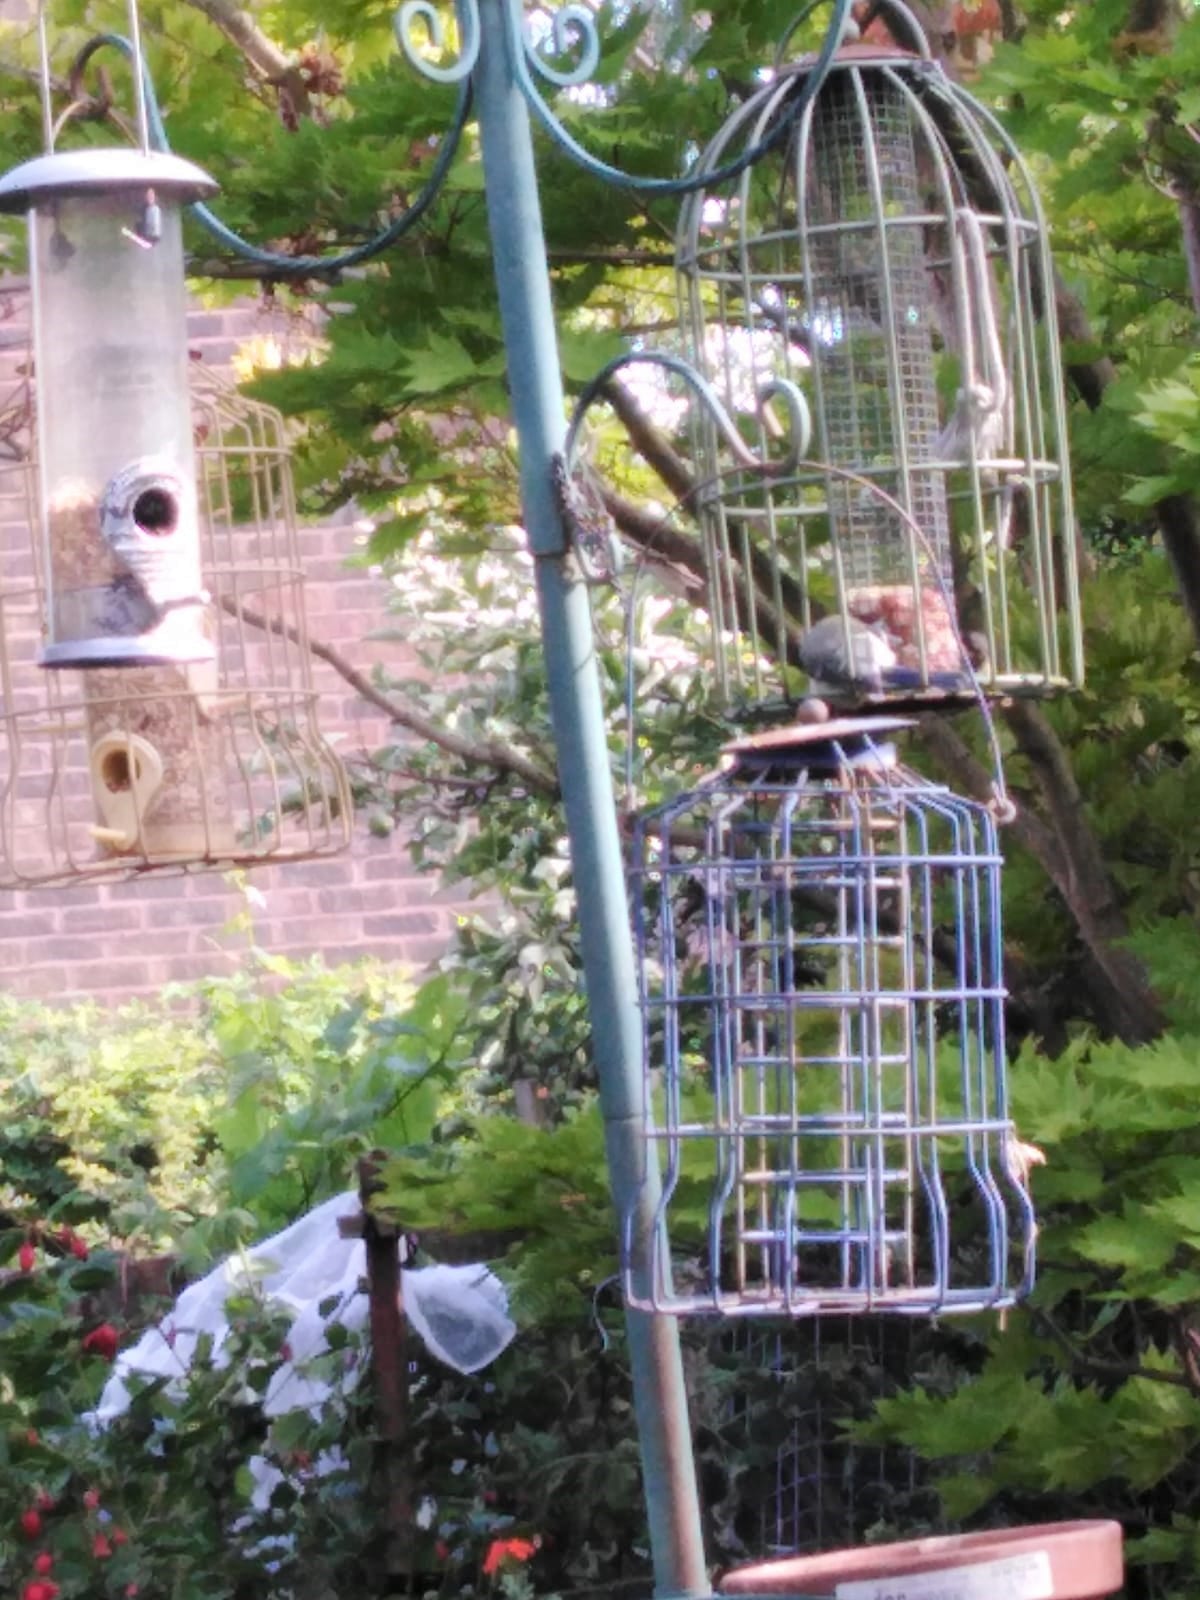 Blue tits on feeders hanging from a feeding station in a garden